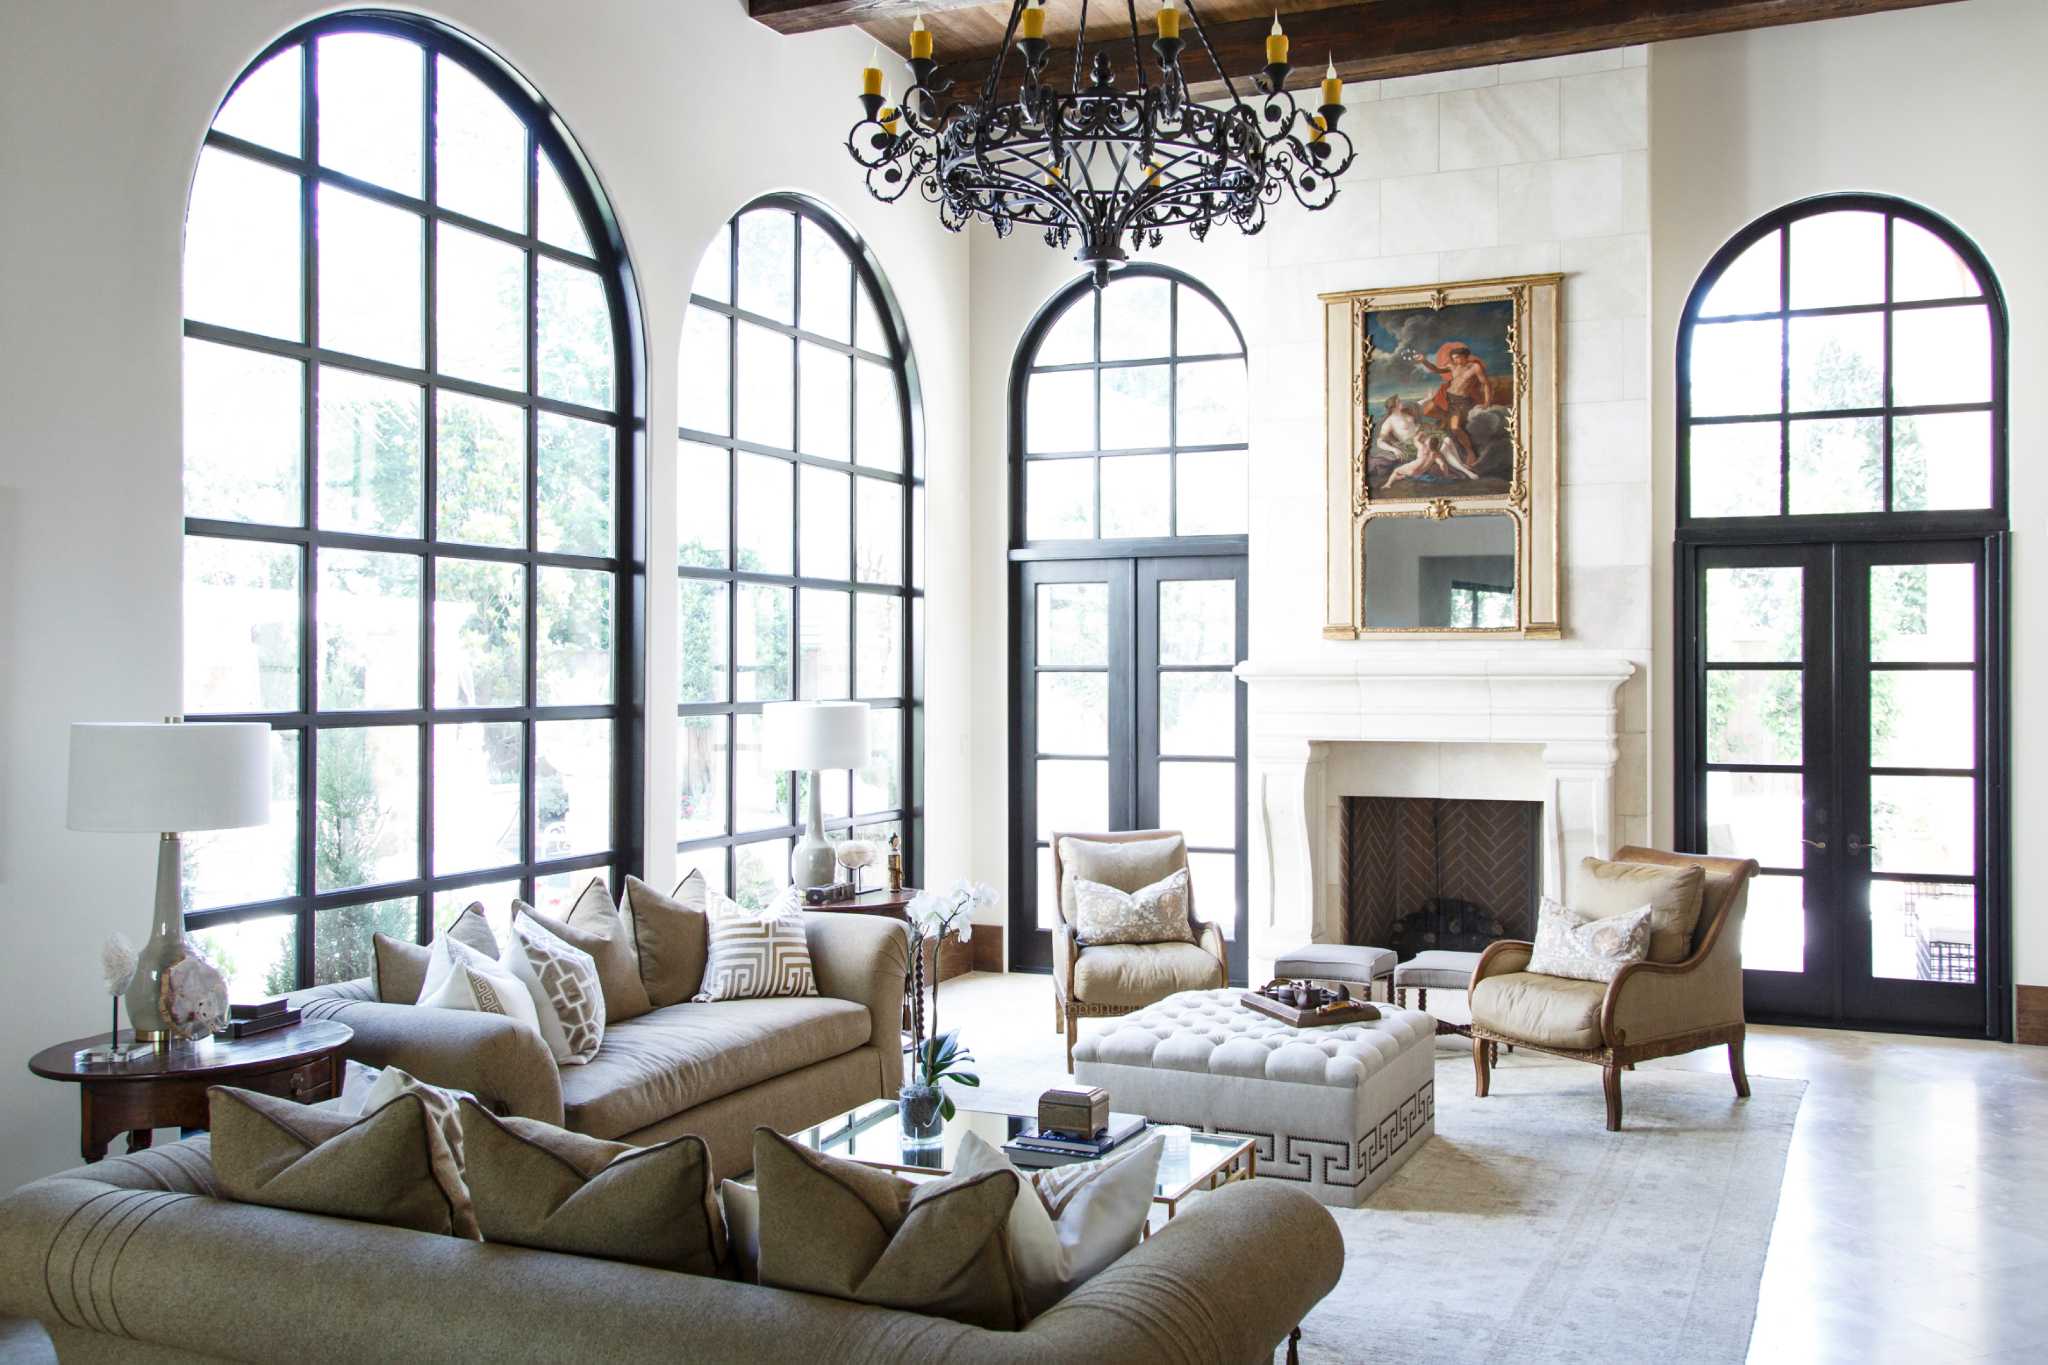 Asian touches meet modern design in this River Oaks home